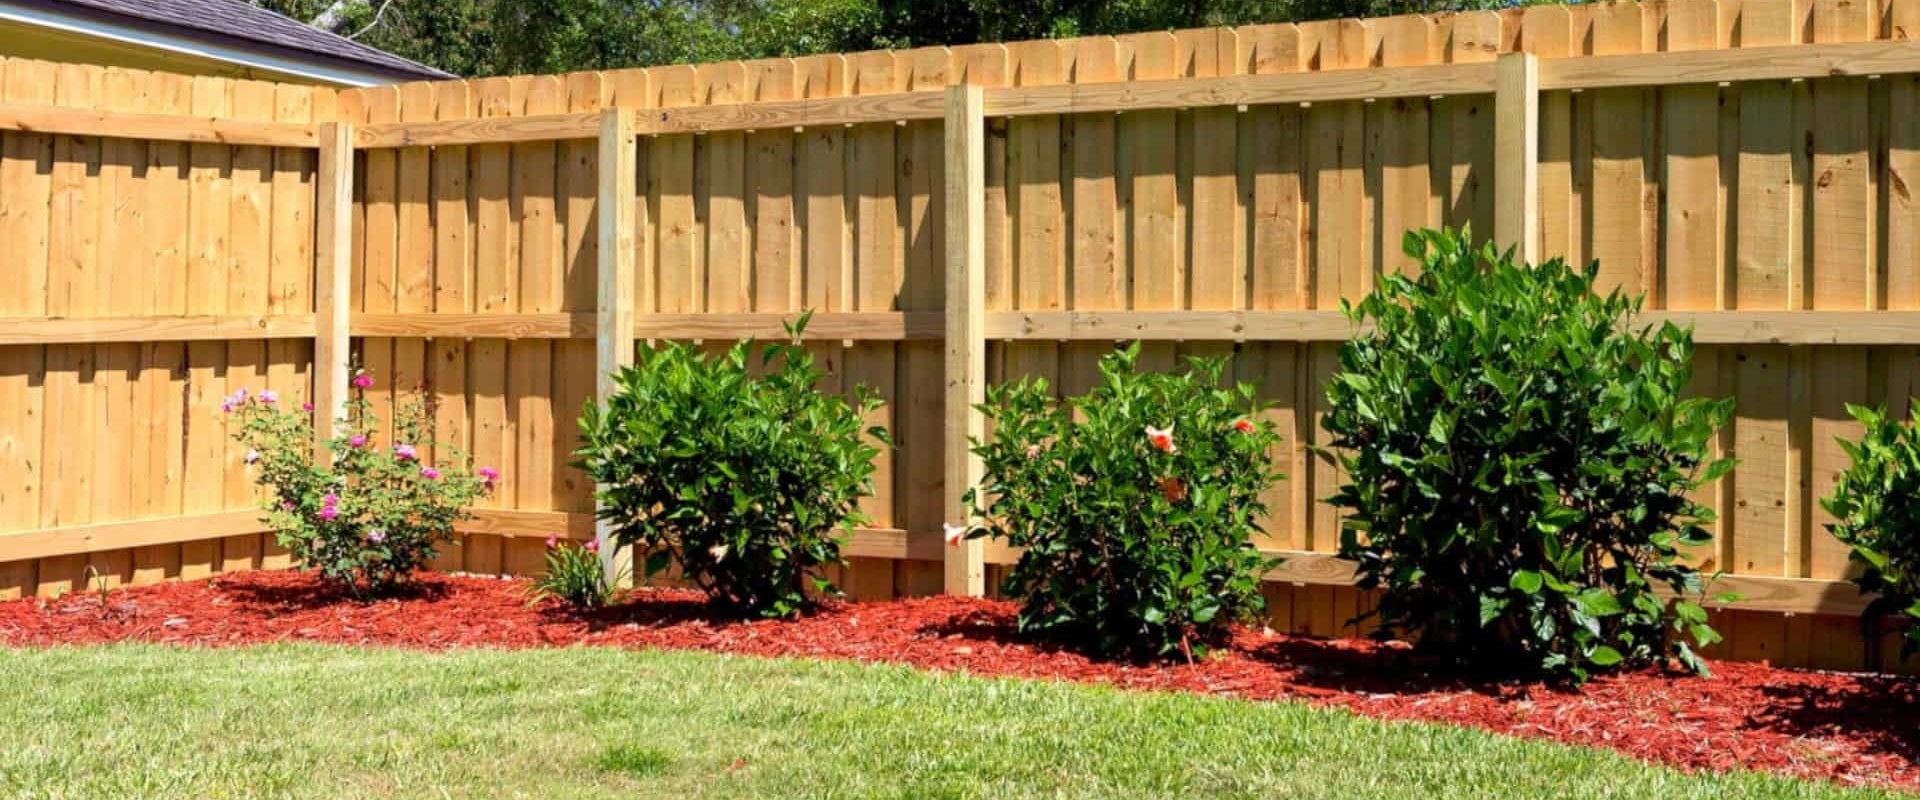 Secure And Scenic: The Fusion Of Fence Services And Landscape Contractors For Hamilton's Residential Haven